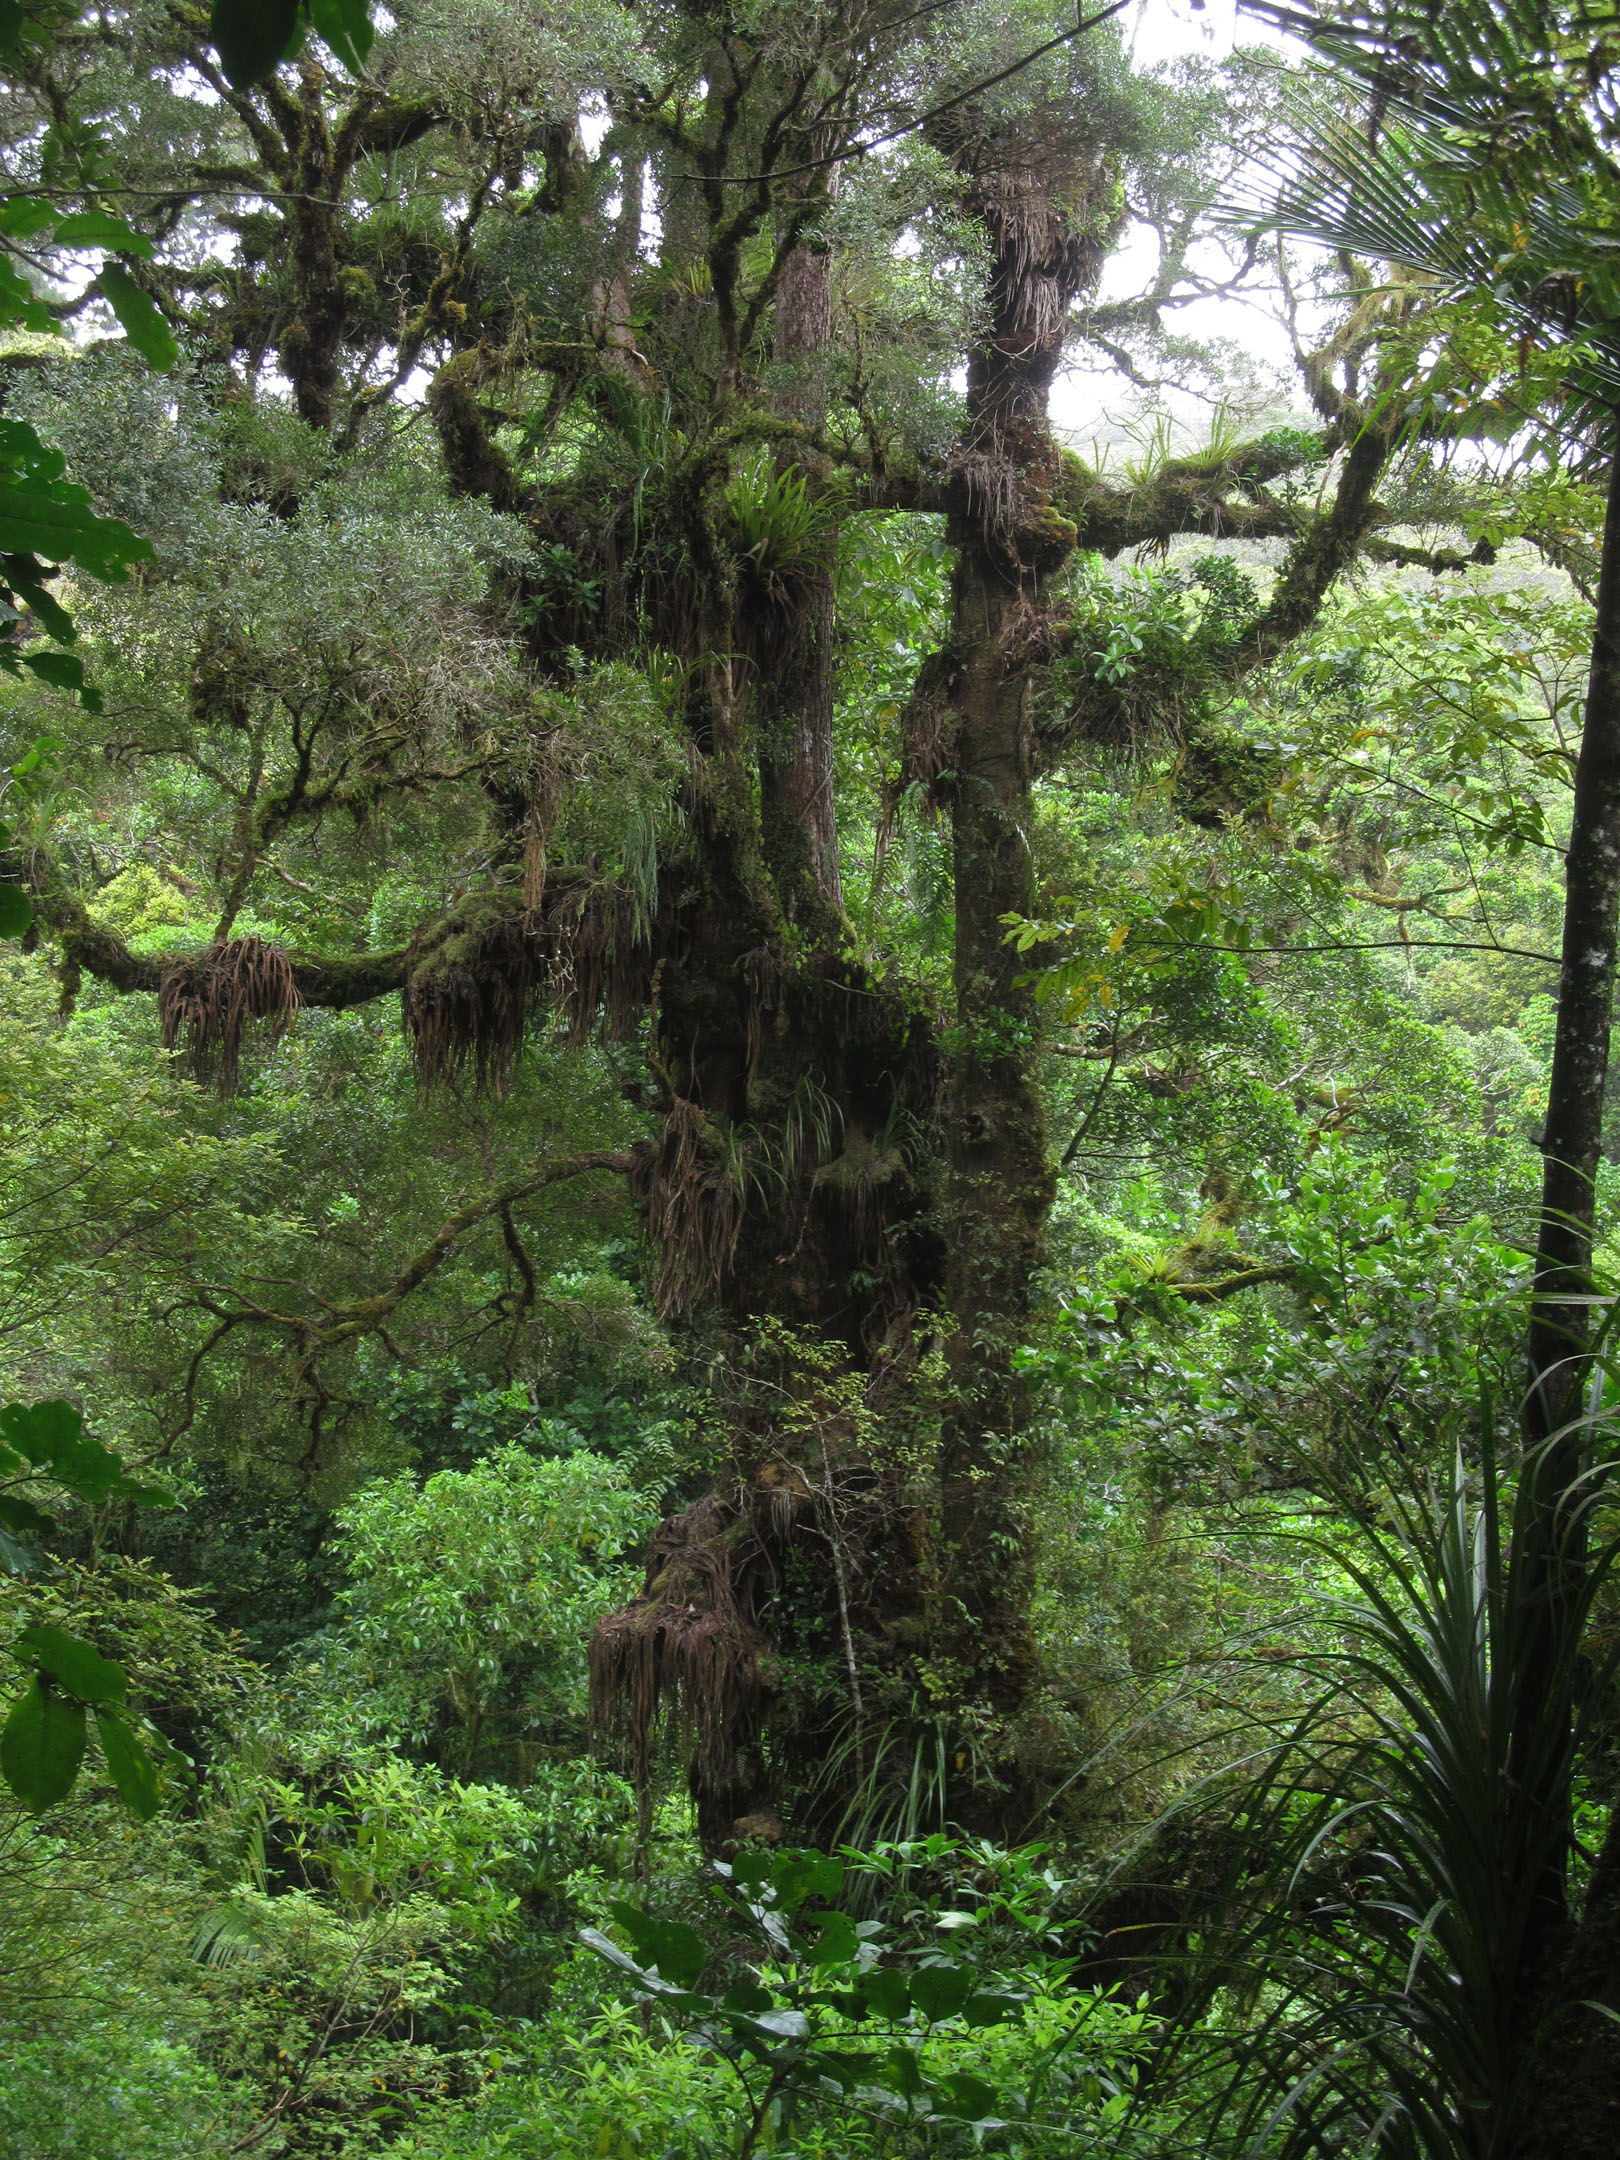 Ancient rimu tree on the Puketi plateau. This is a favourite kokako song tree. Photo by Asher Wallace